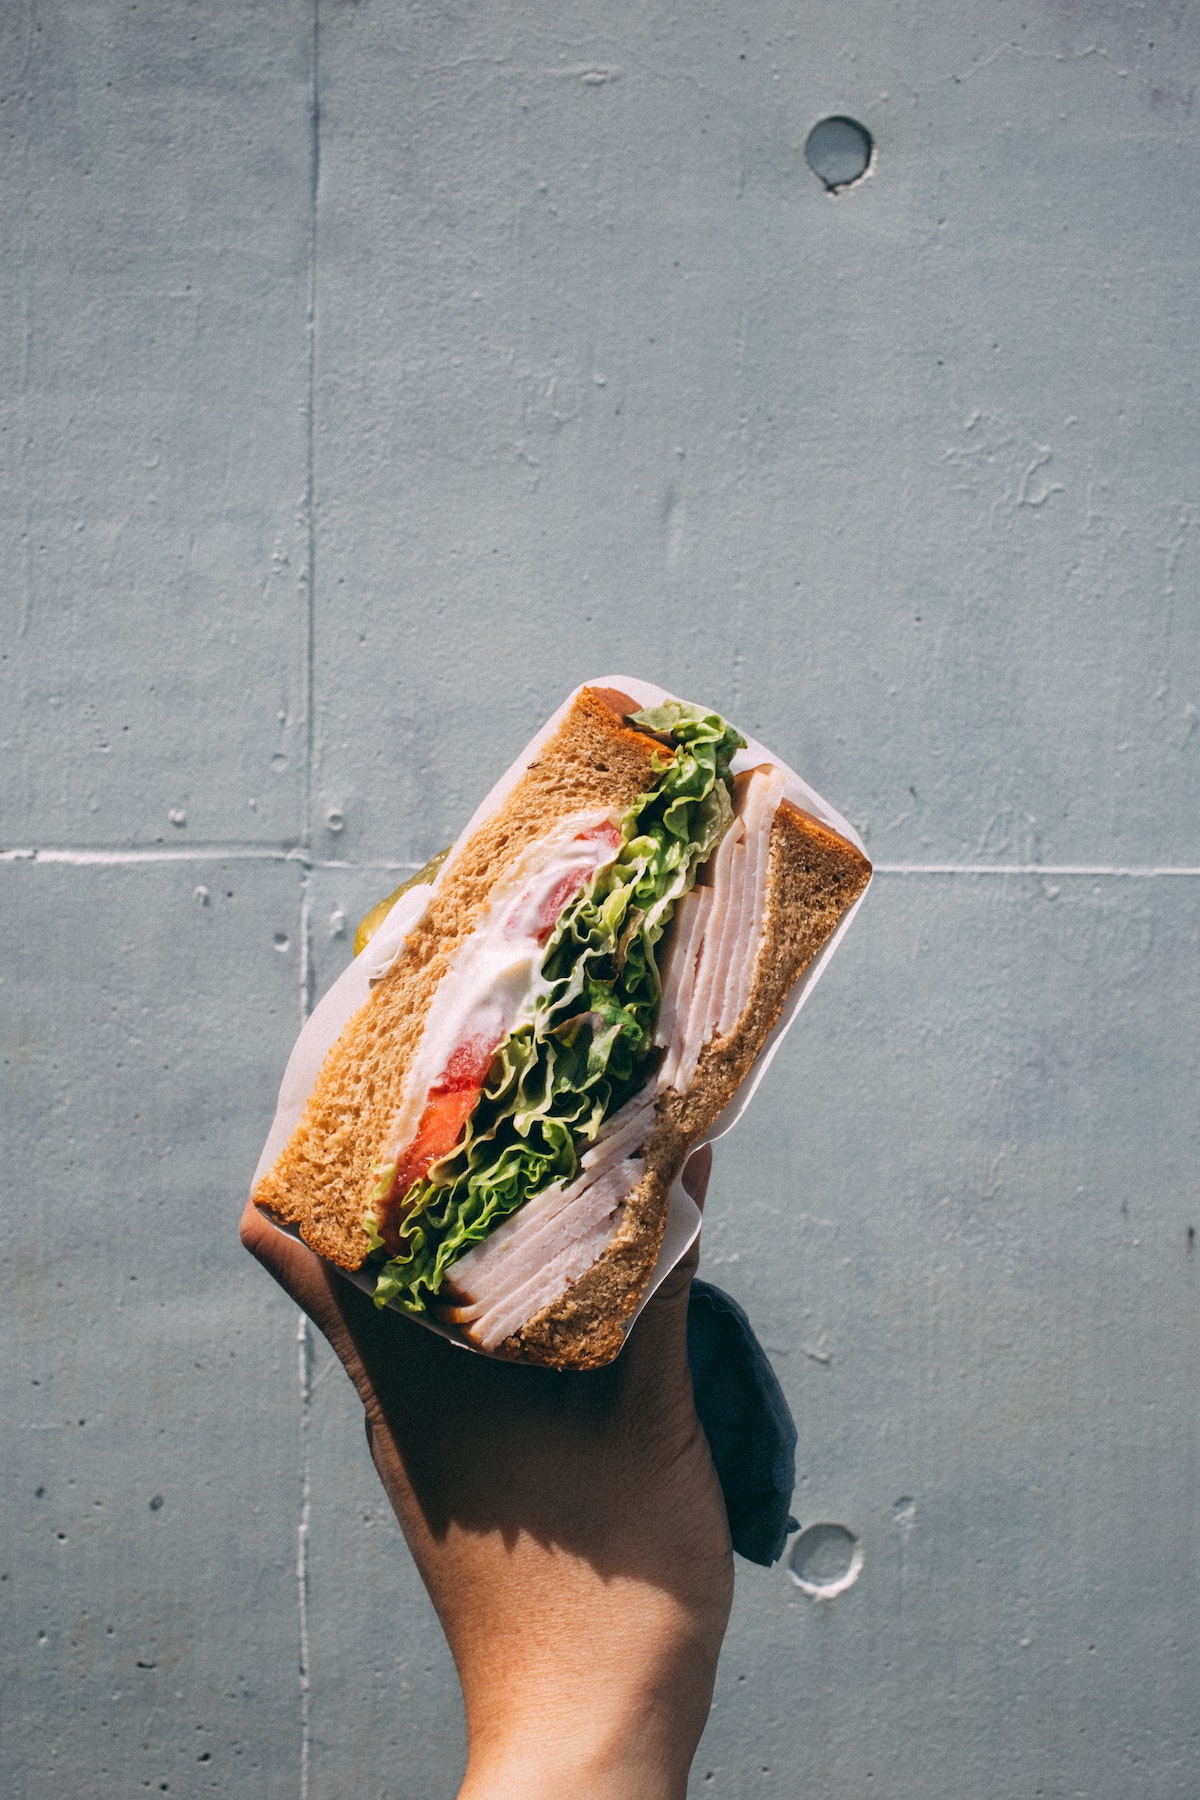 Person's hand holding a sandwich filled with meat and leafy greens